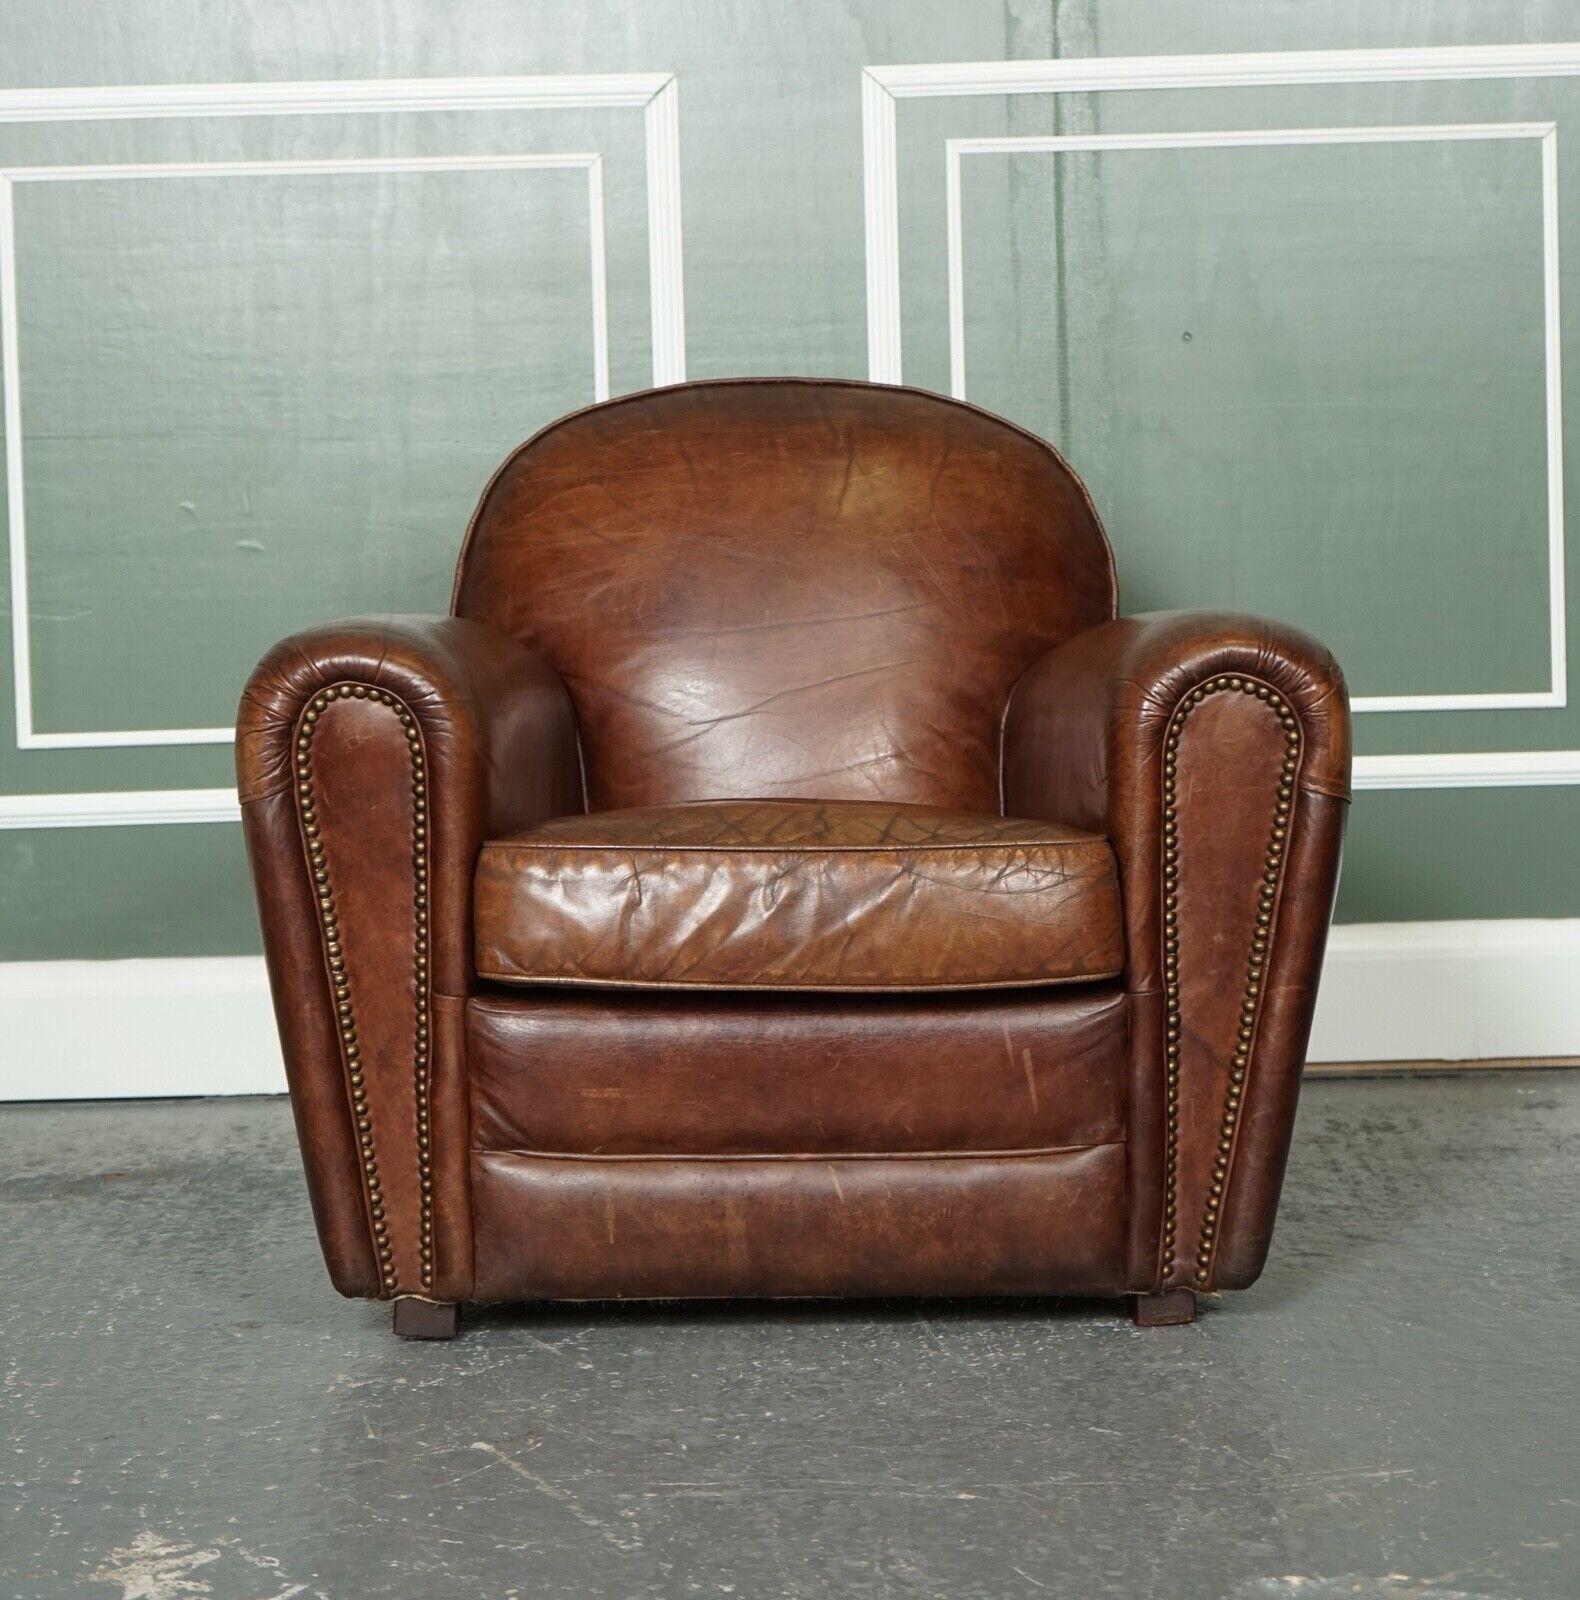 old leather armchair